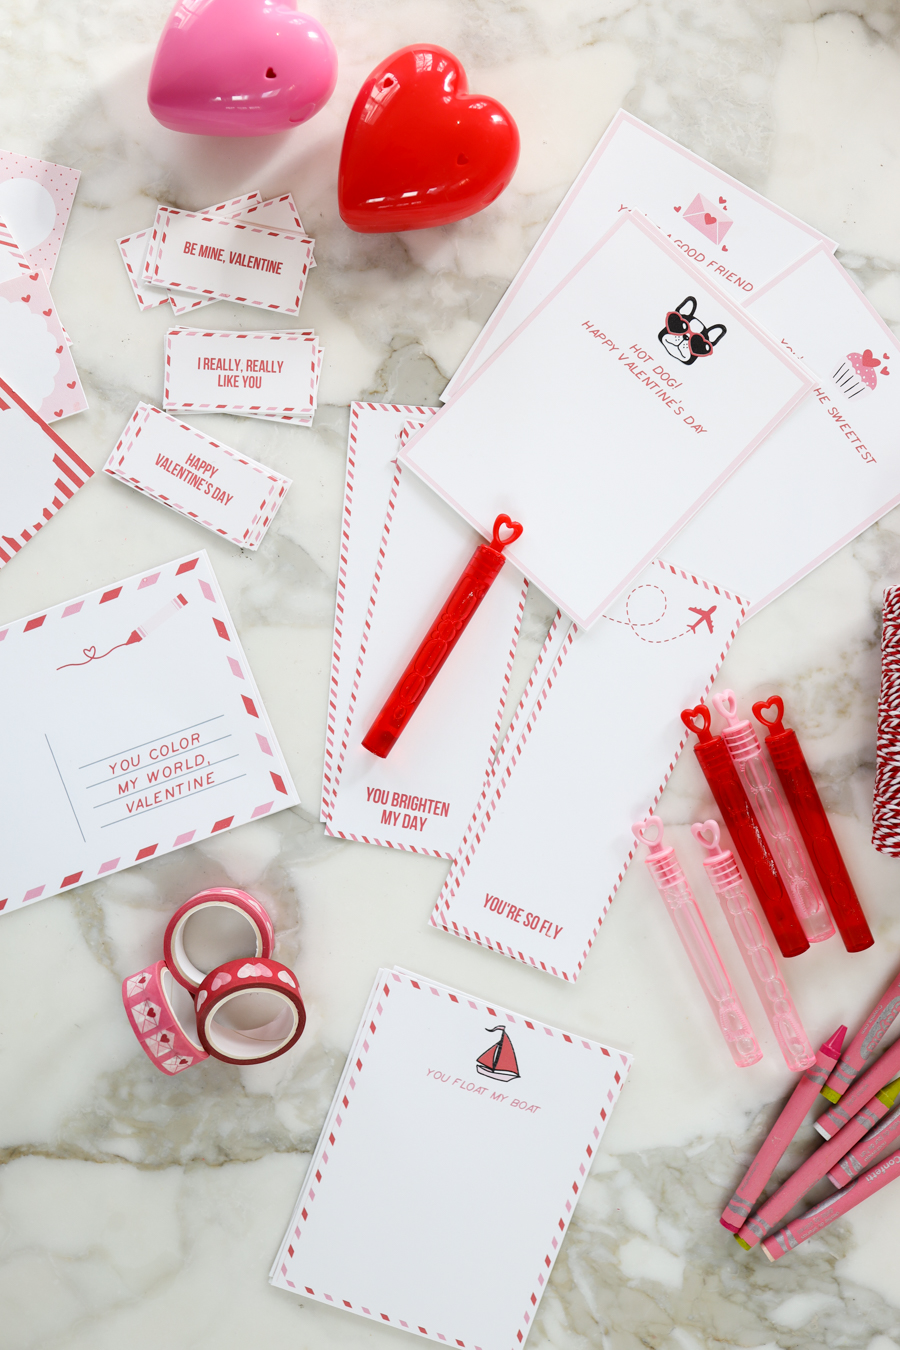 10 easy Valentine's Day crafts for kids to make | Mum's Grapevine